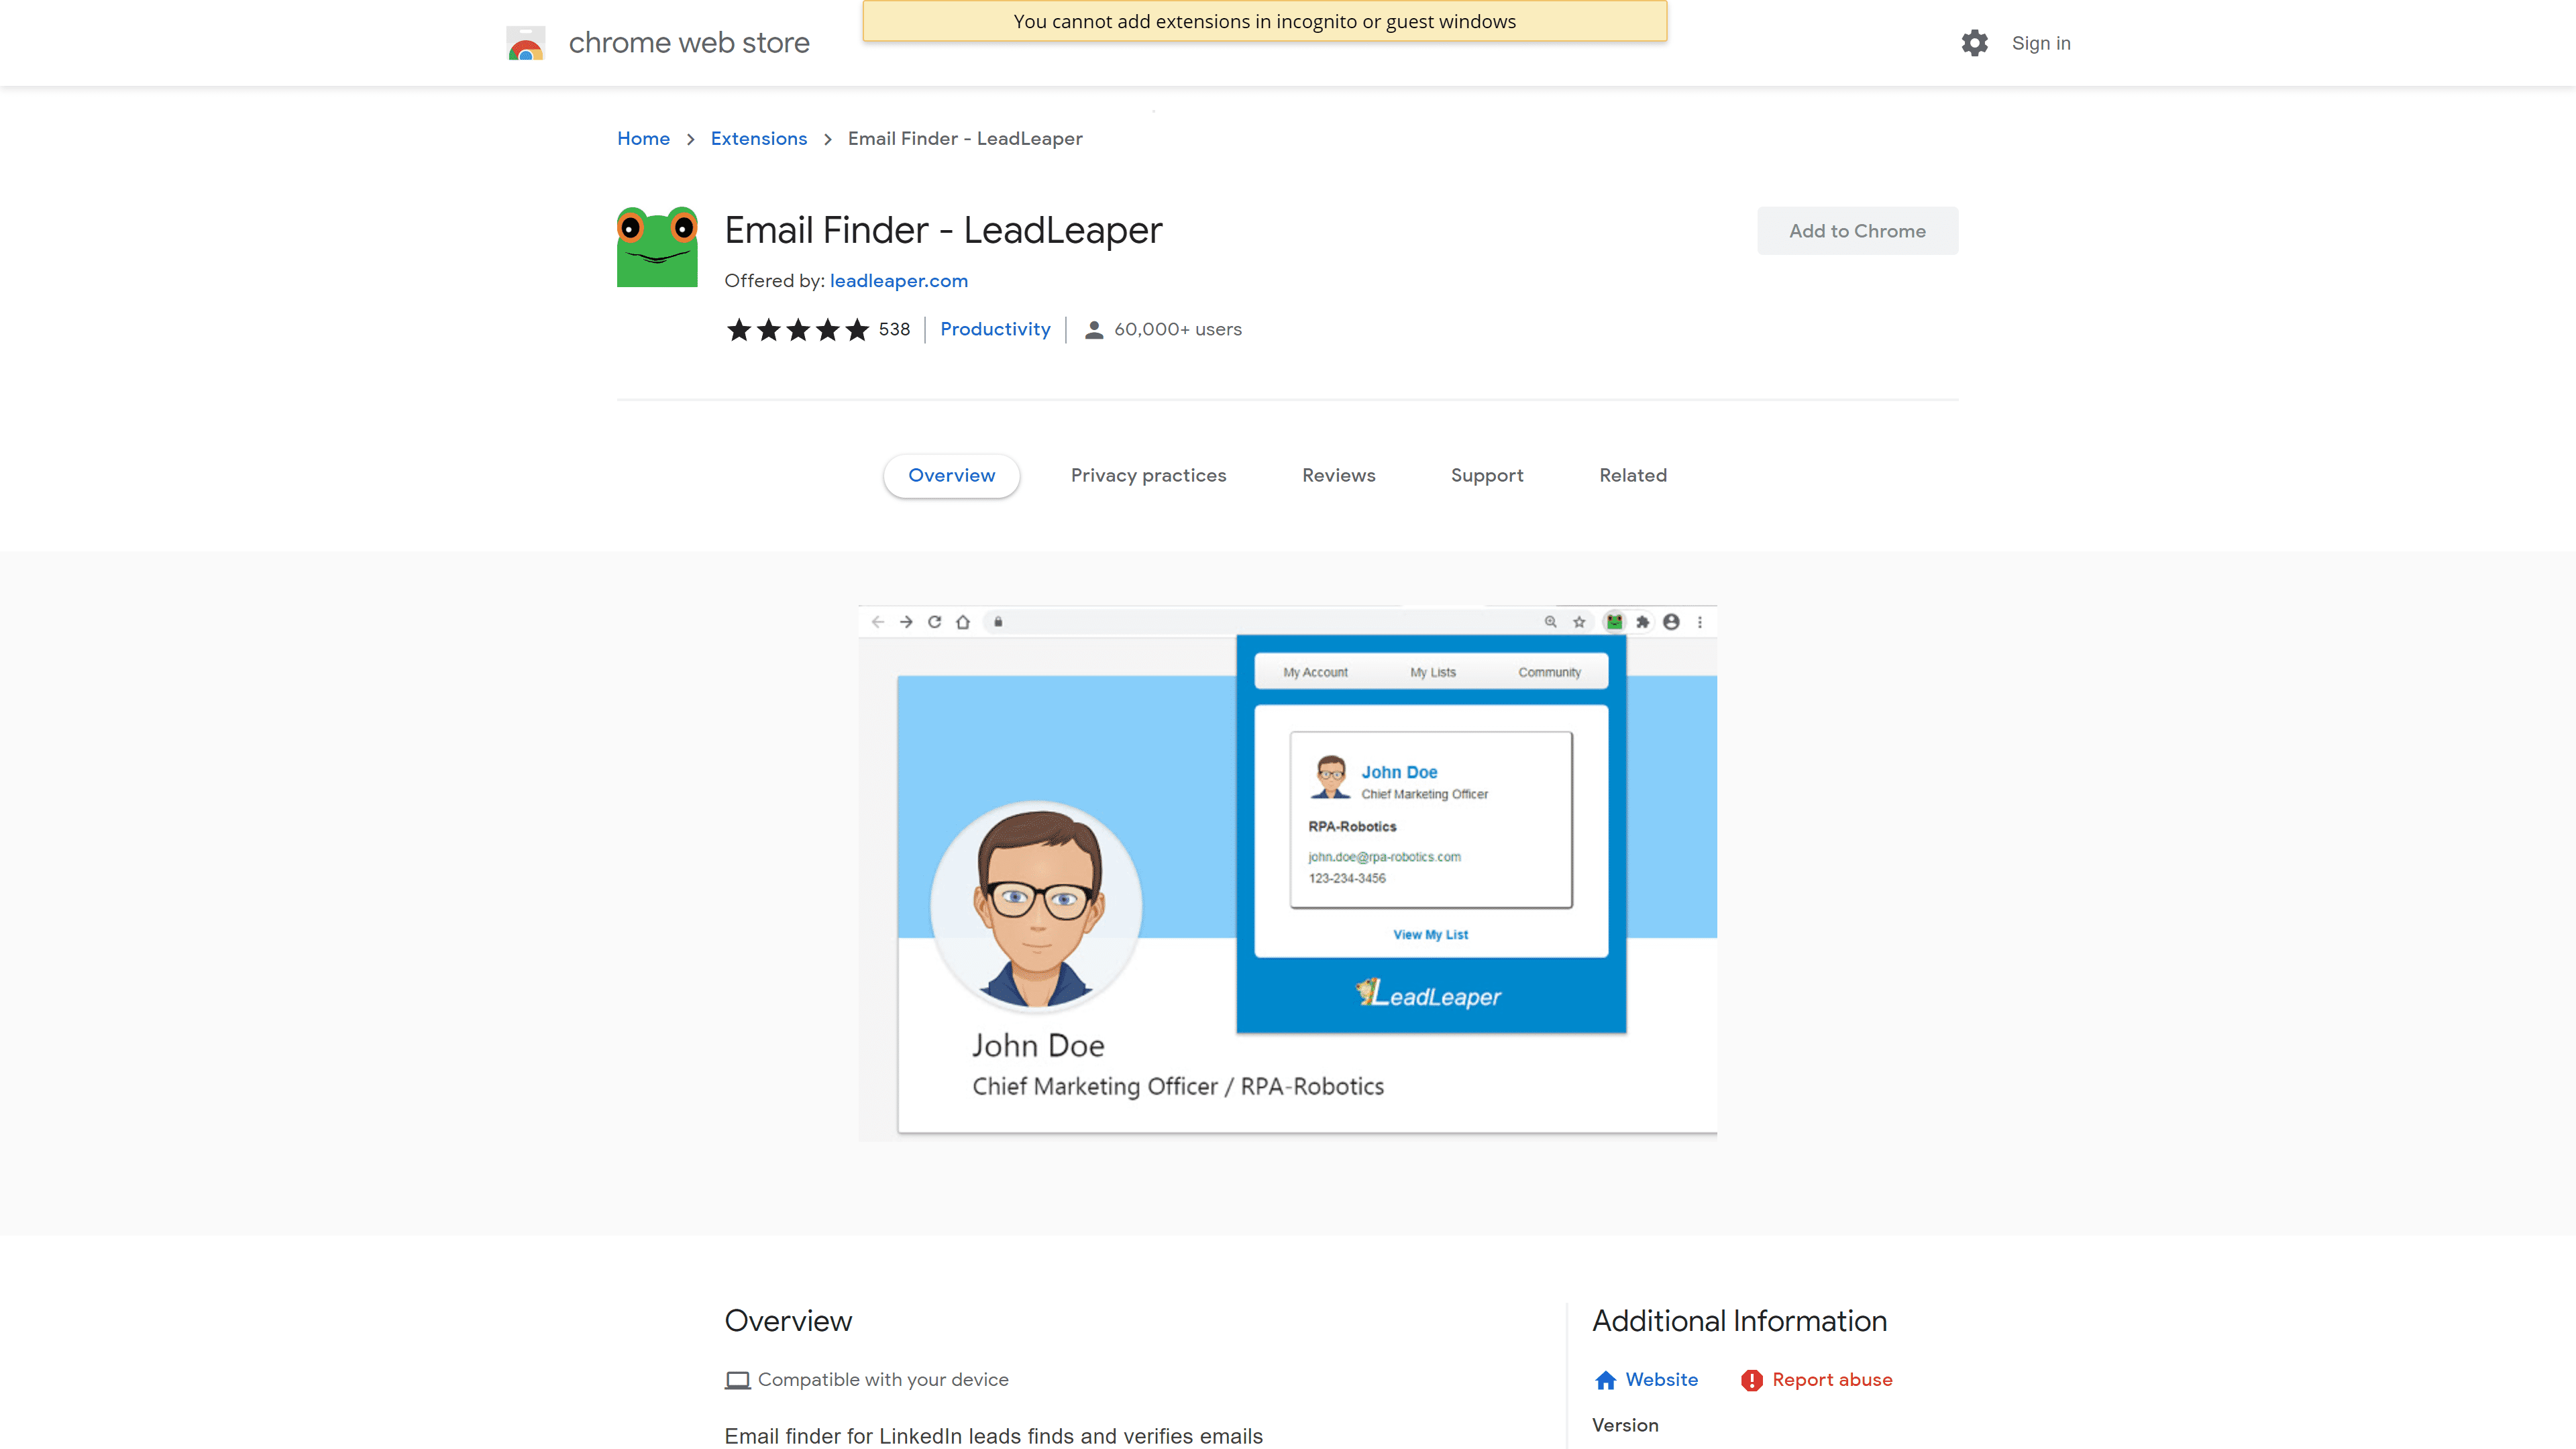 Email Finder by LeadLeaper